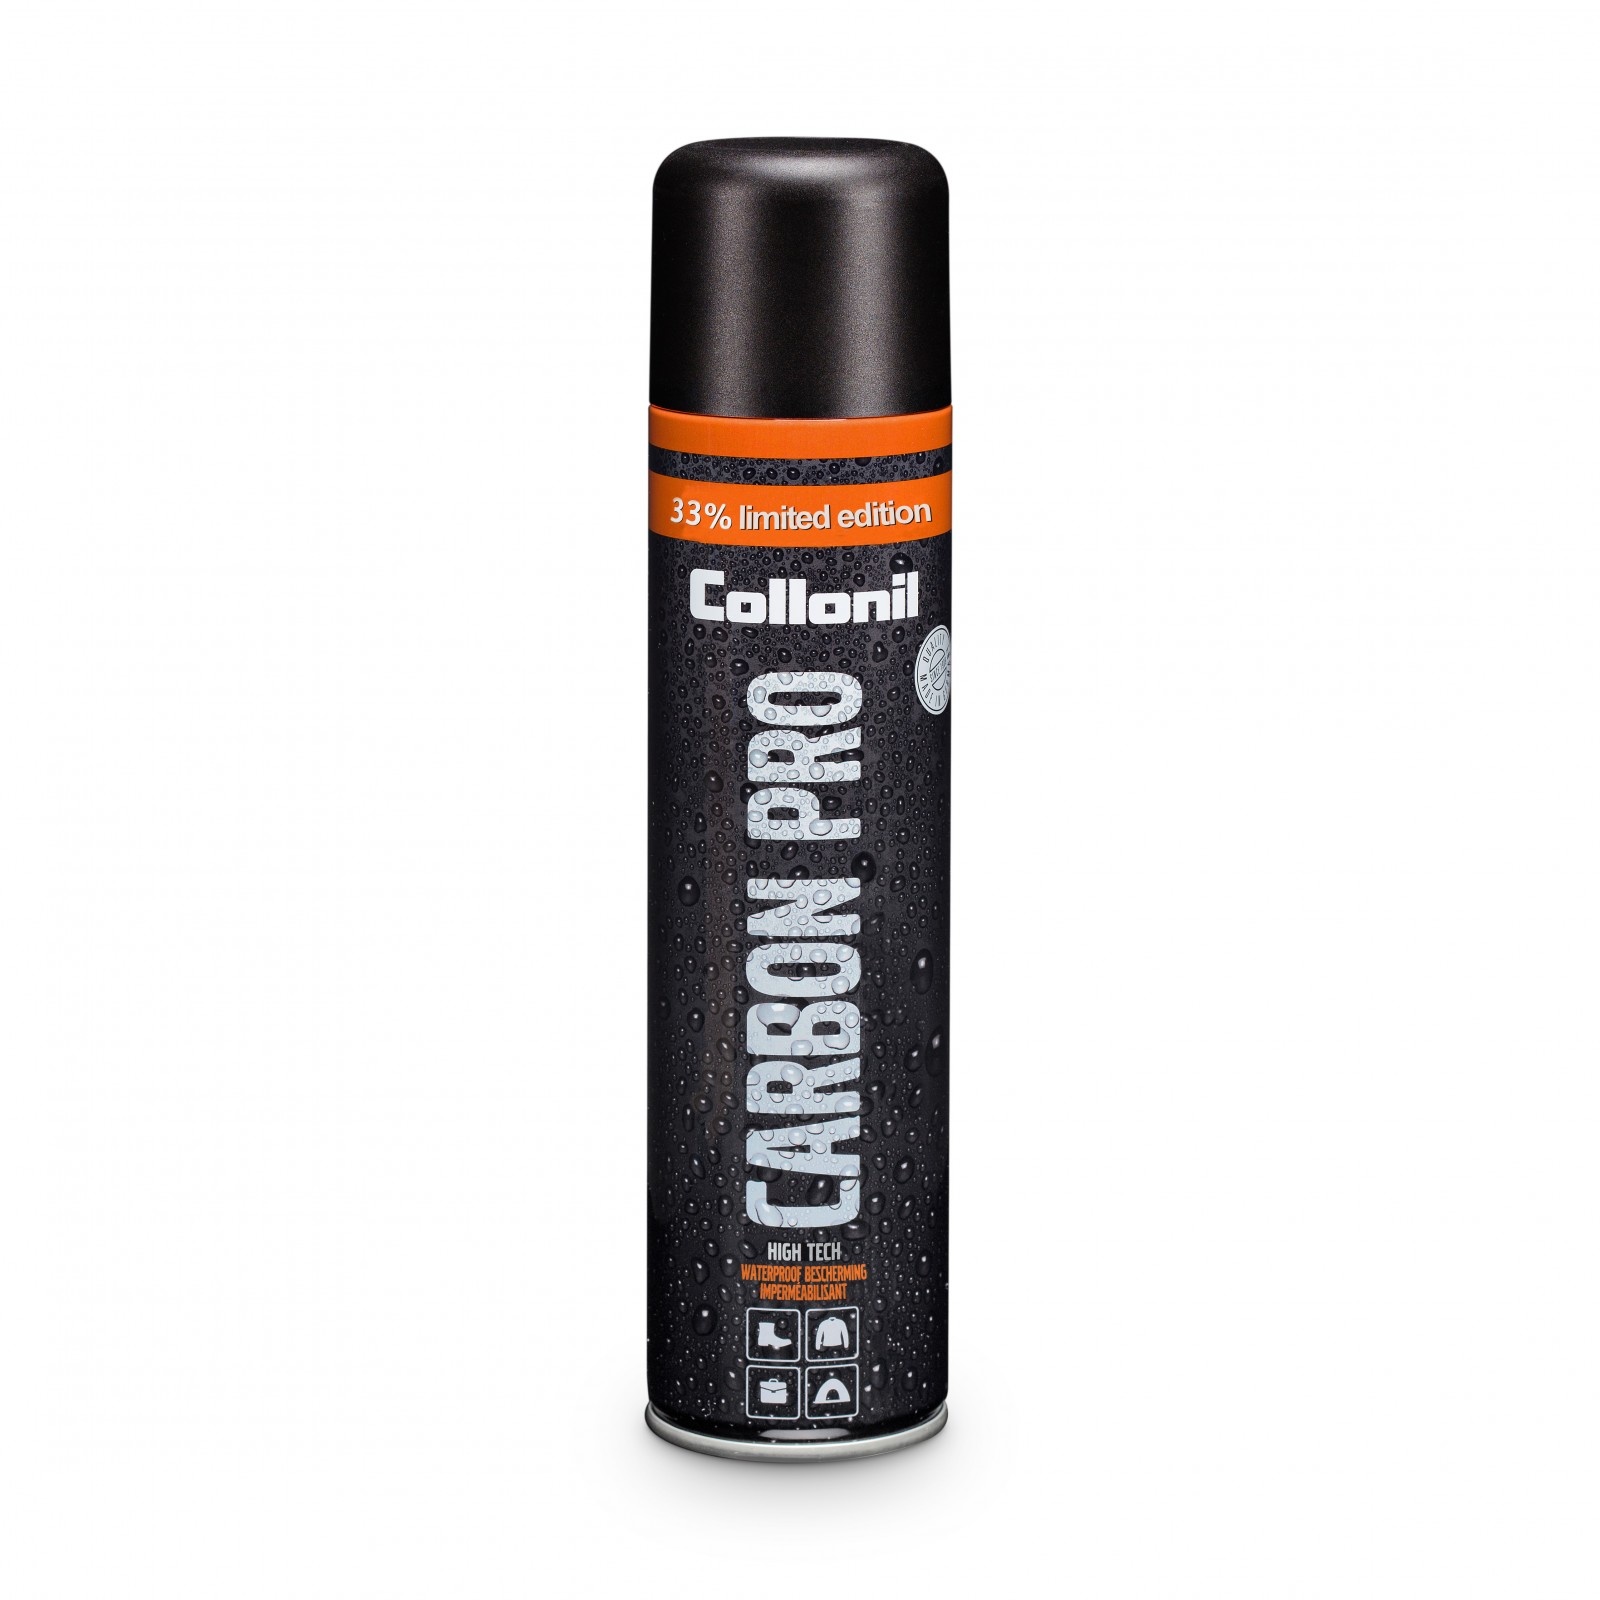 Collonil Carbon Pro +33% limited ed. spray 400 ml